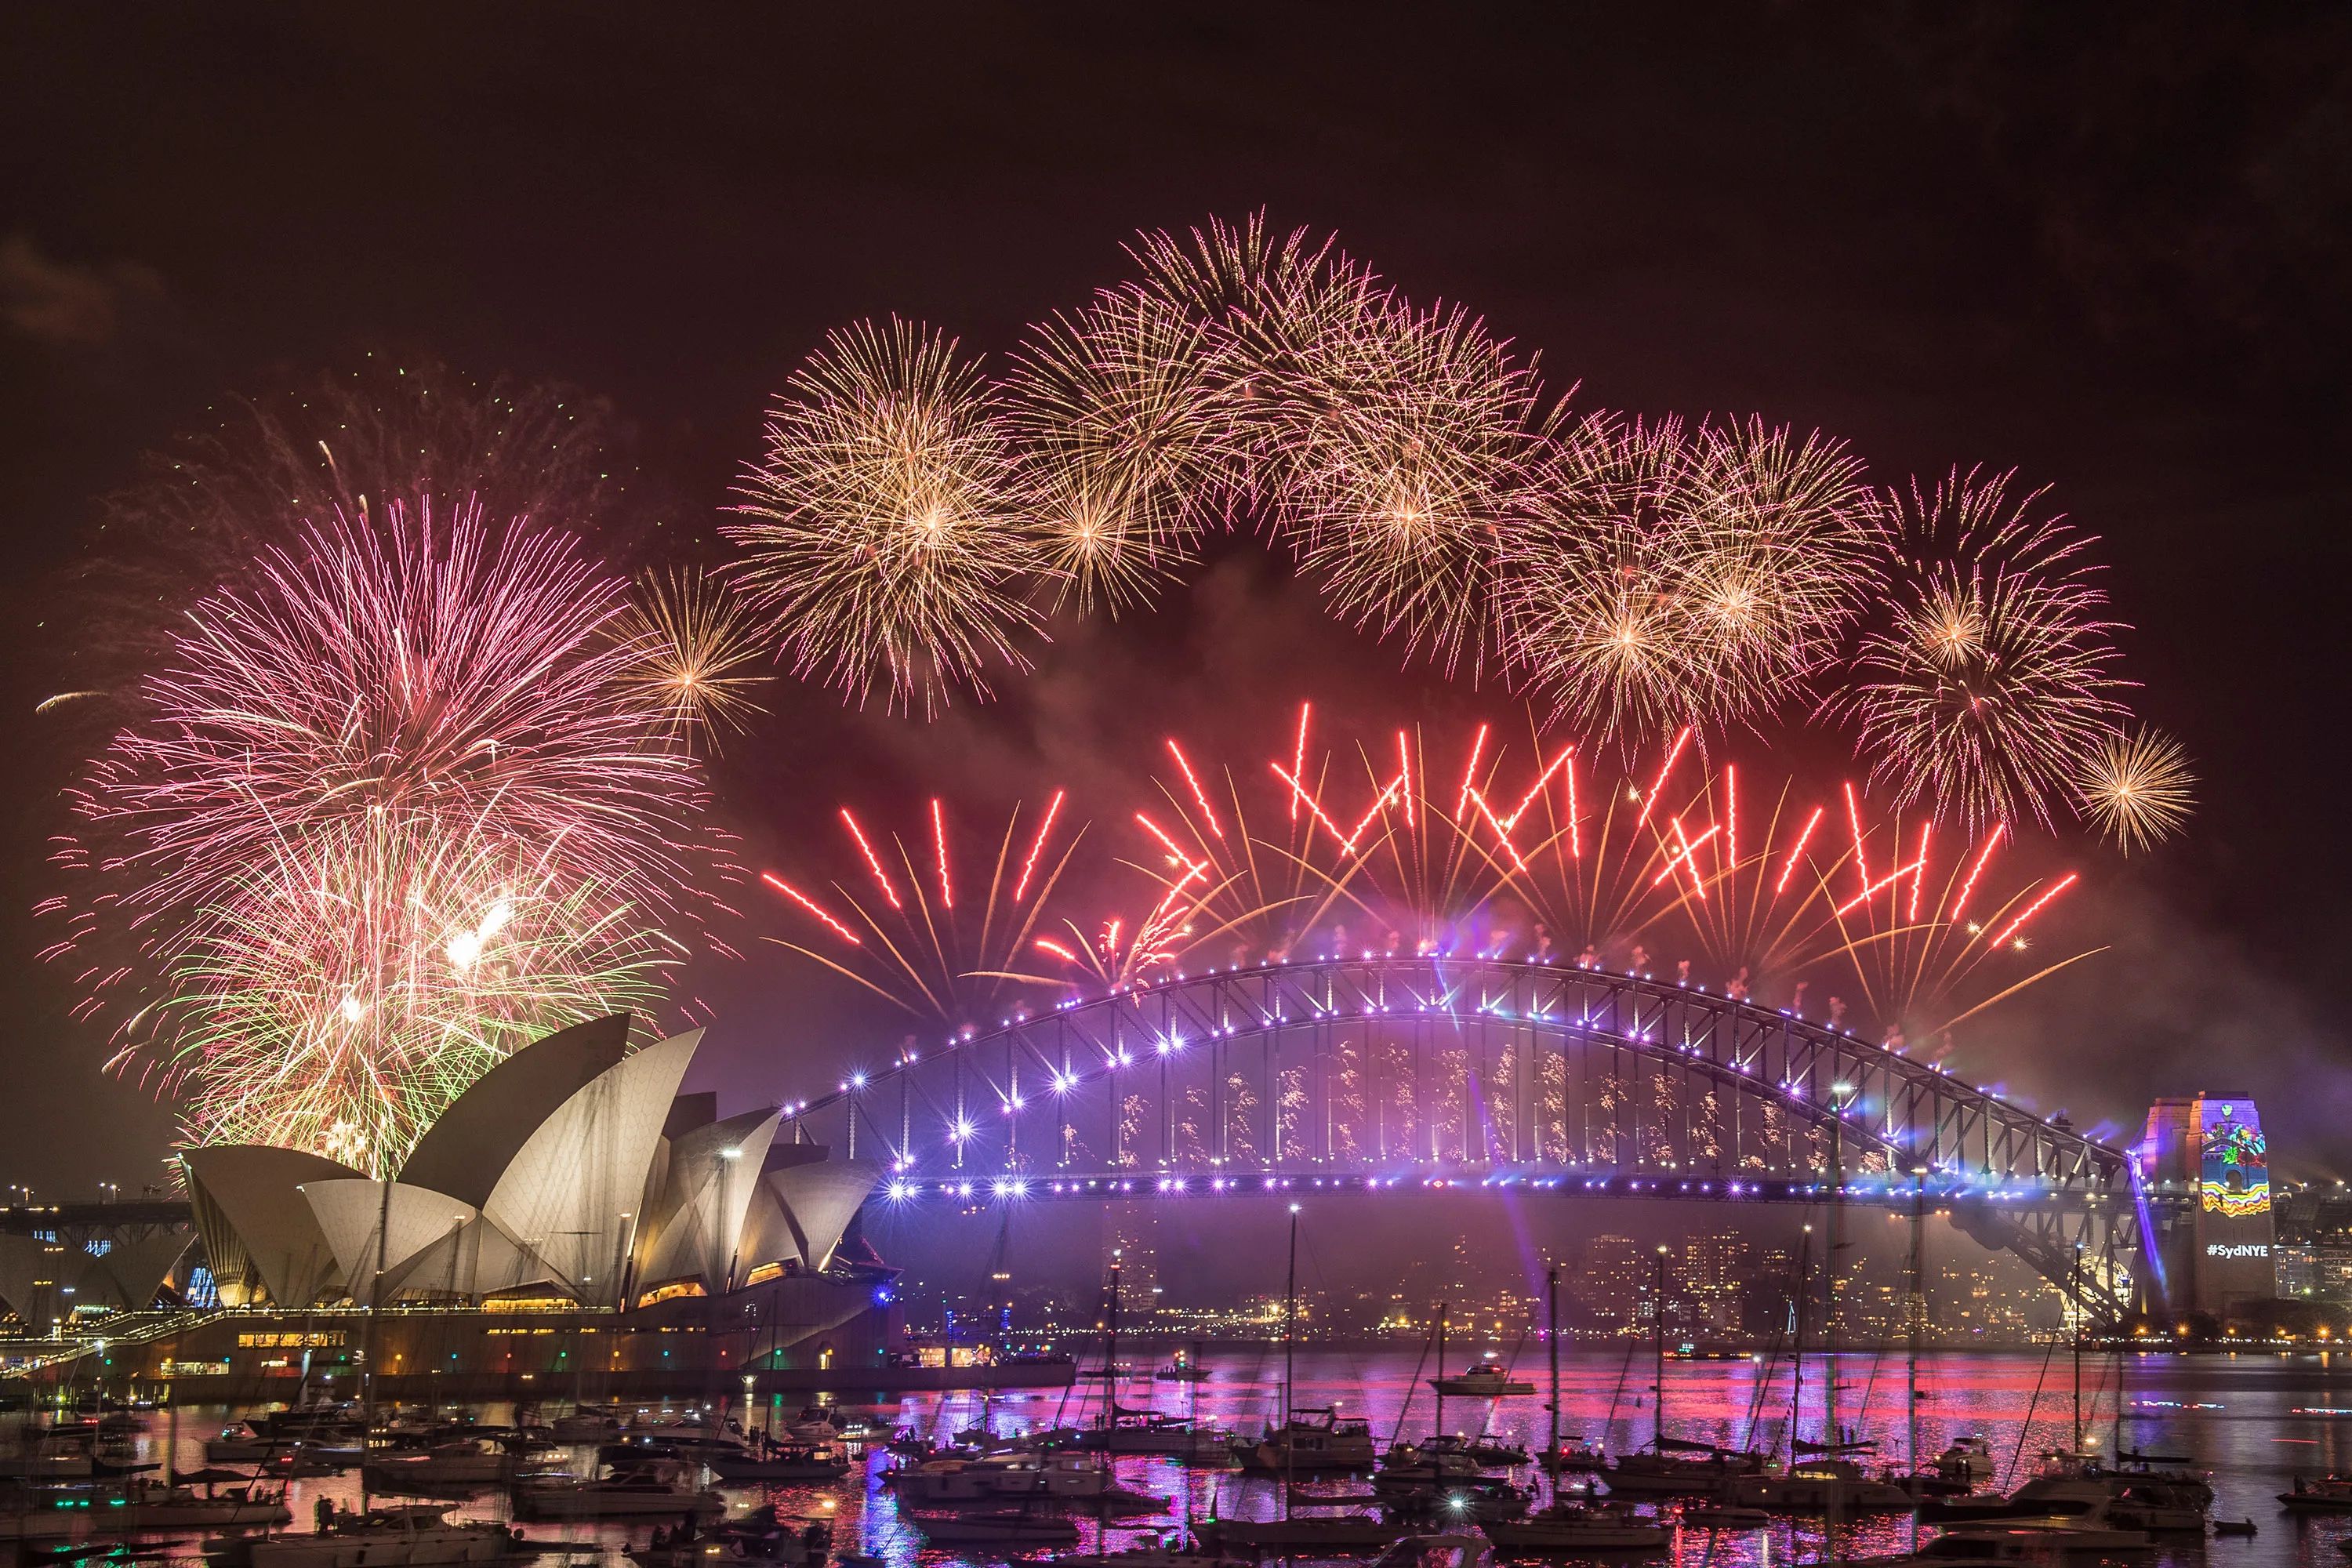 A fireworks display over the harbor in sydney - New Year